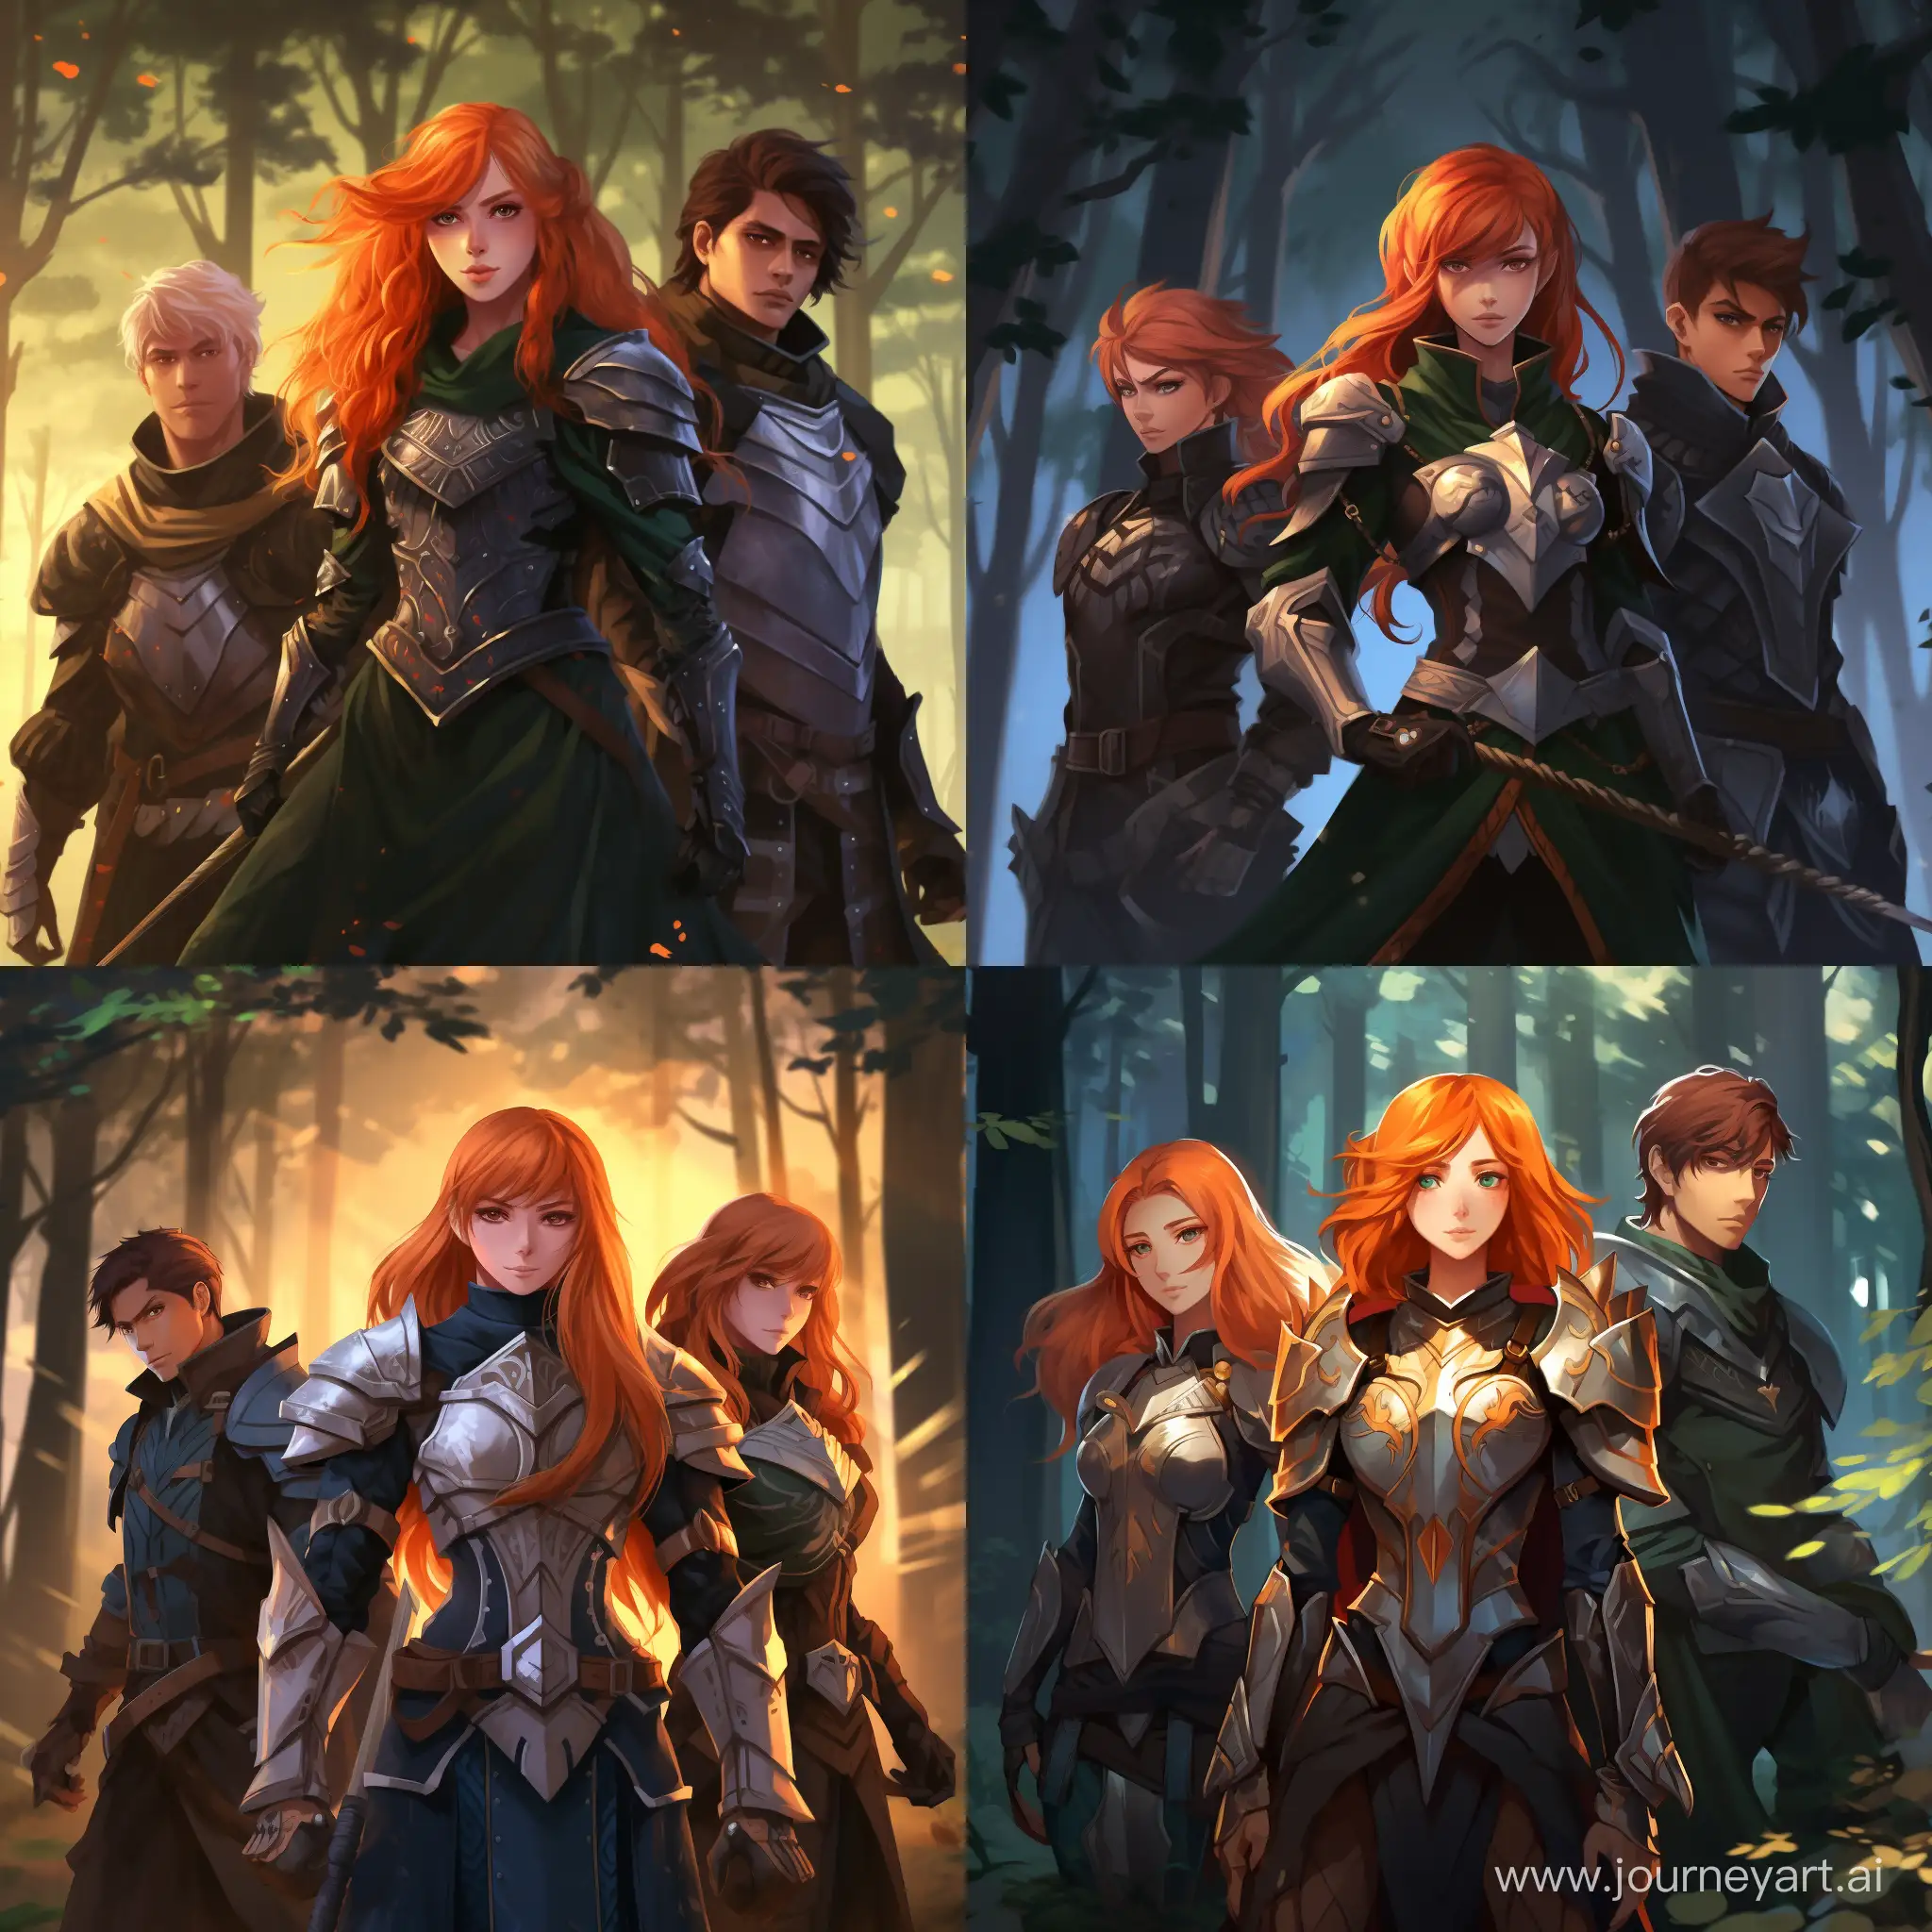 a forest with three people. a young red haired wizard. a ranger elf. a female paladin. anime style